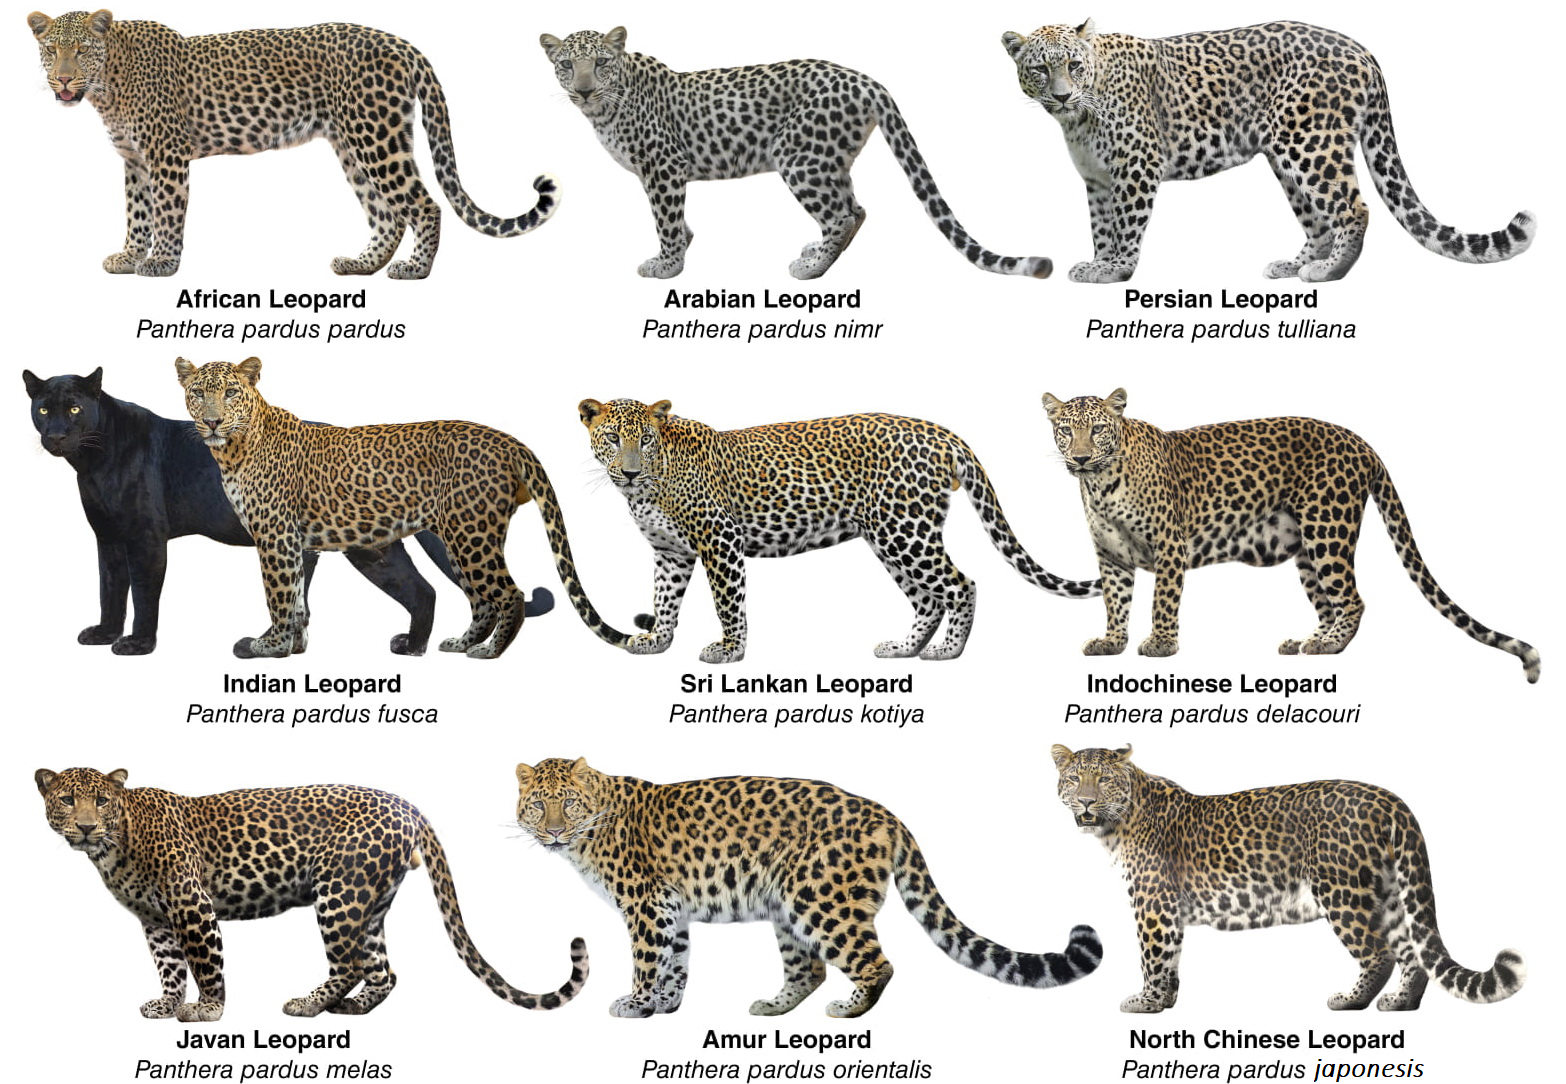 The nine subspecies of leopard. Originally taken from Castelló, José R.. Felids and Hyenas of the World: Wildcats, Panthers, Lynx, Pumas, Ocelots, Caracals, and Relatives, Princeton: Princeton University Press, 2020. https://doi.org/10.1515/9780691211862